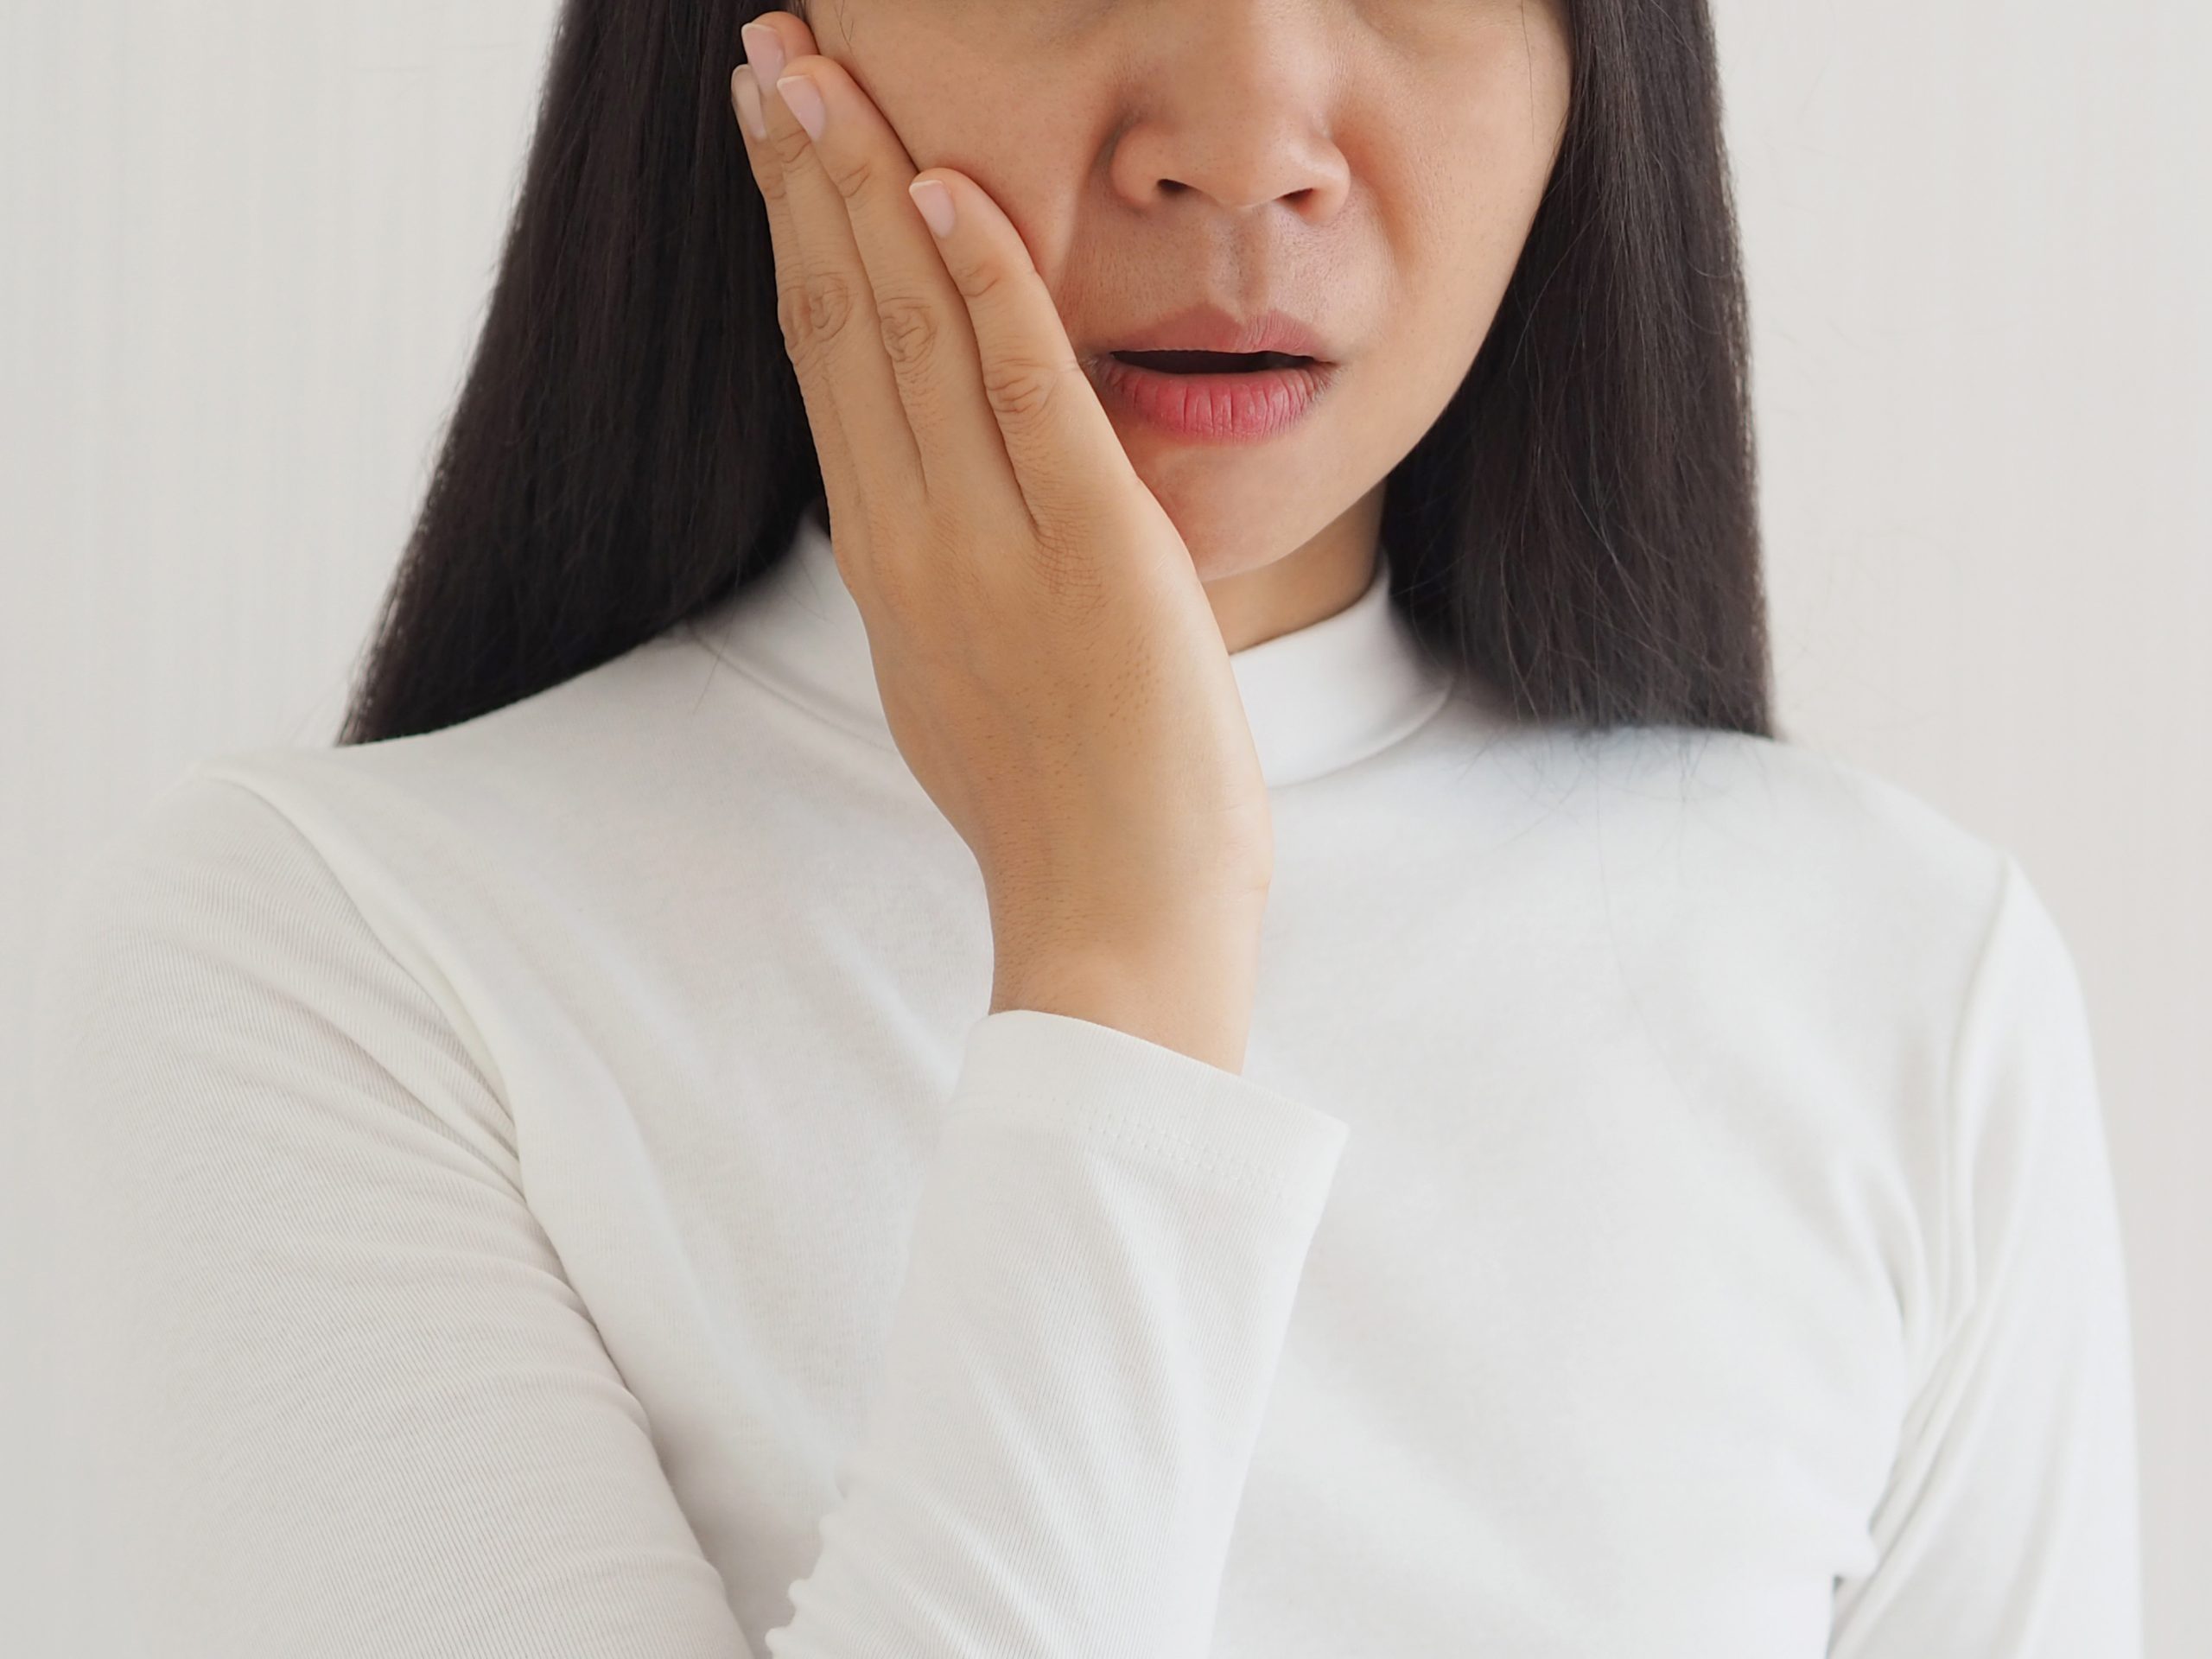 trigeminal neuralgia and temporomandibular joint and muscle disorder in asian woman, She use hand touching her cheek and symptoms fo pain and suffering on isoleted white background.